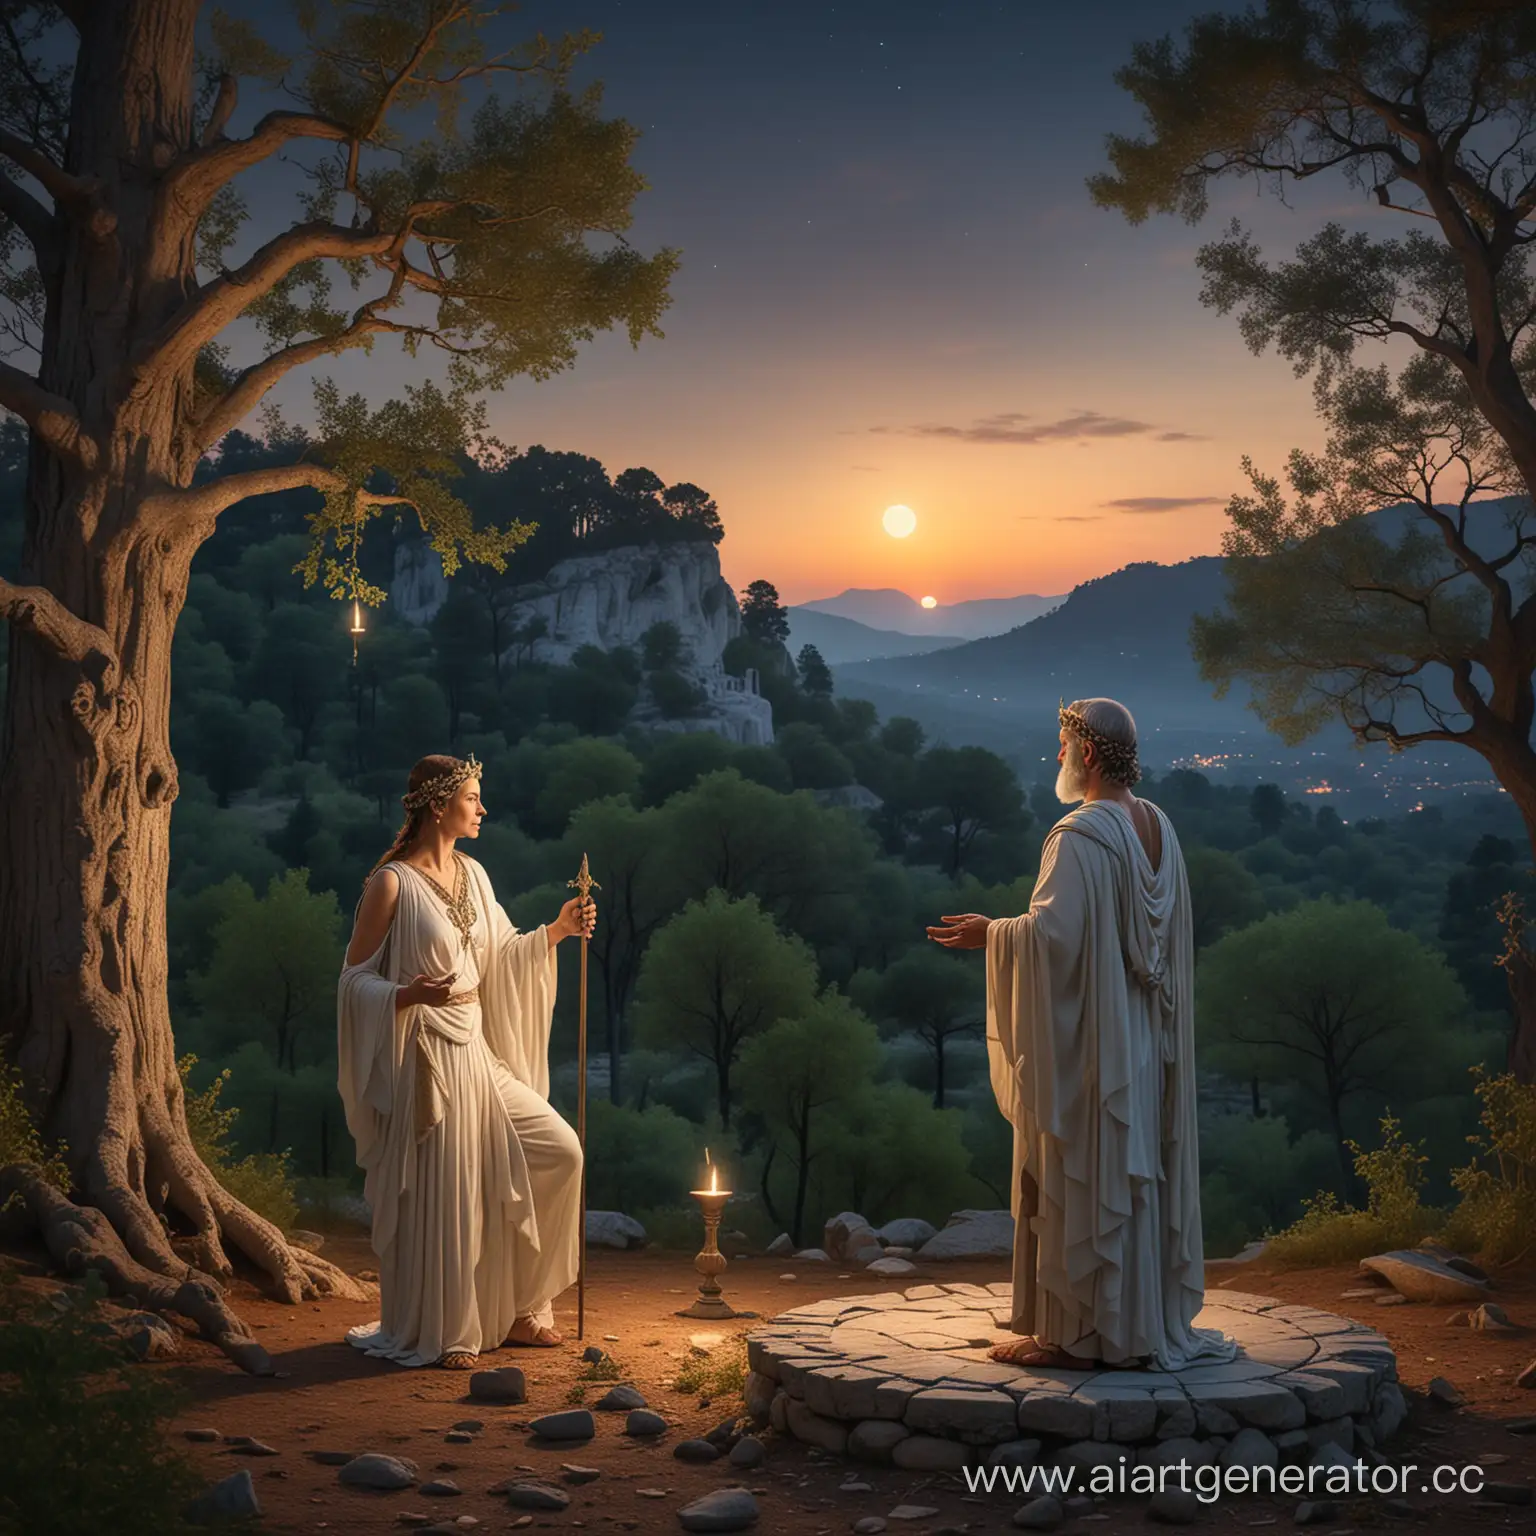 Old Roman king Numa Pompilius worshipping the goddess in the sacred grove of Diana in Aricia, evening, forest, young moon, hills, obscure temple in the background